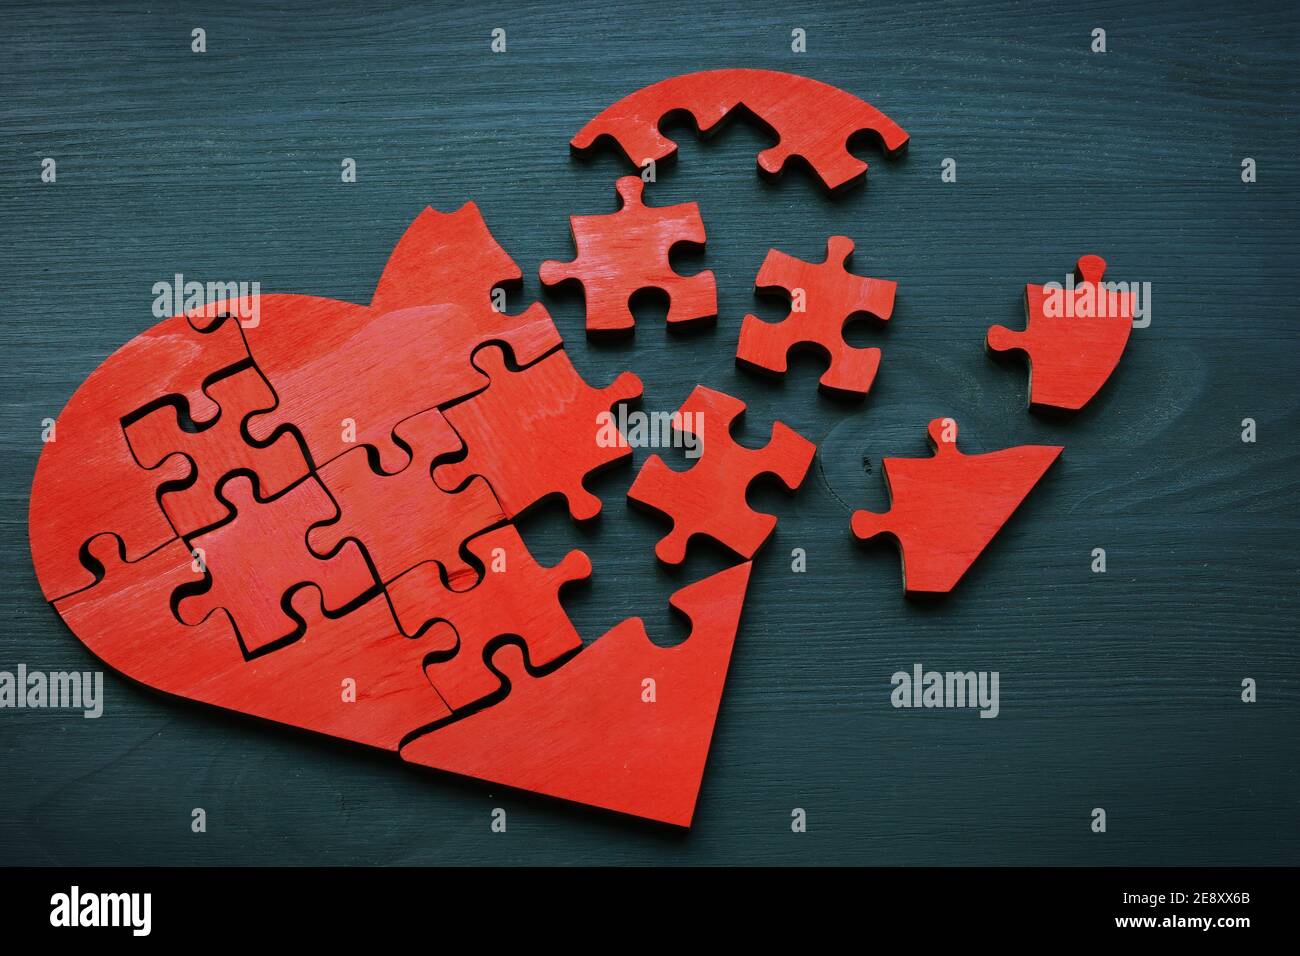 A broken heart made from puzzle pieces as a symbol of relationship problems. Stock Photo